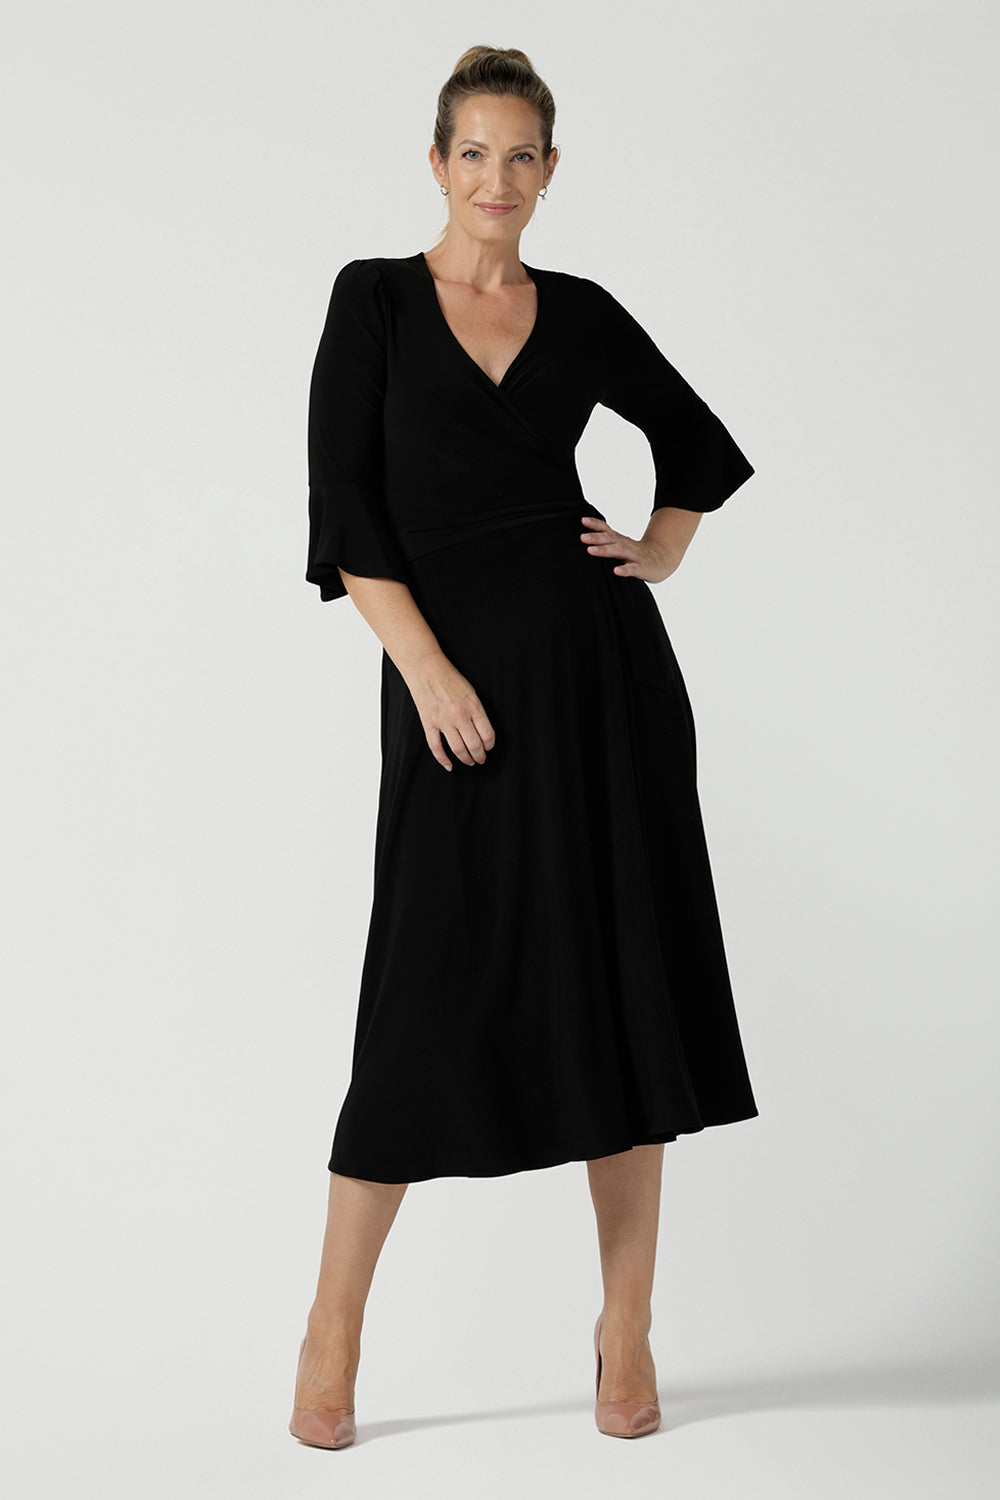 Size 10 corporate woman wears the Portia dress in Black. A wrap dress in black with tie side and 3/4 sleeve. Styled back with pink heels and v-neckline. Made in Australia for women size 8 - 24.